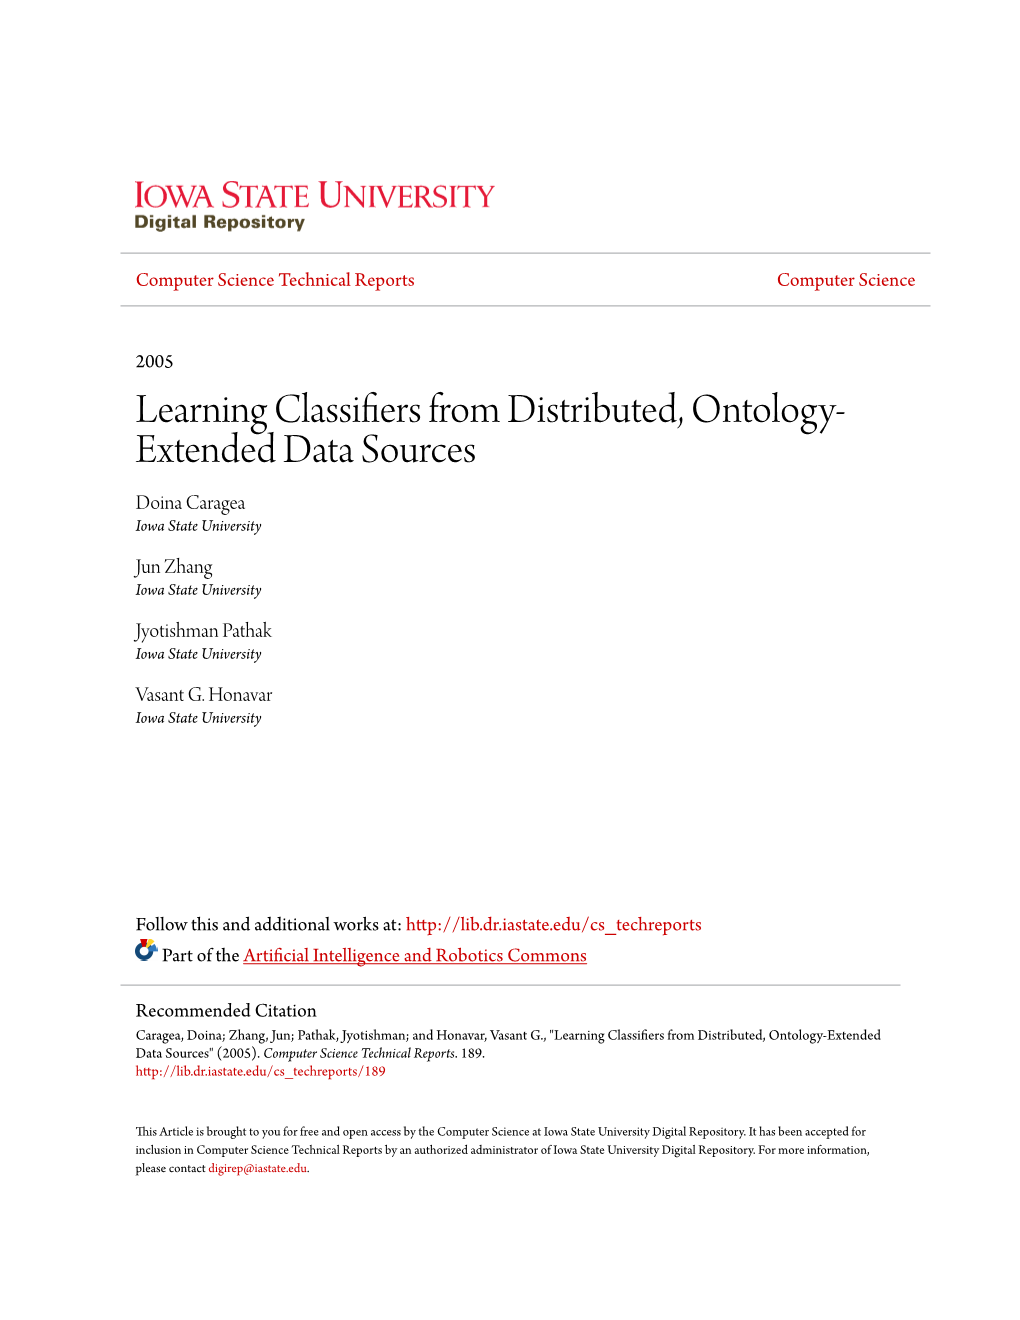 Learning Classifiers from Distributed, Ontology-Extended Data Sources" (2005)